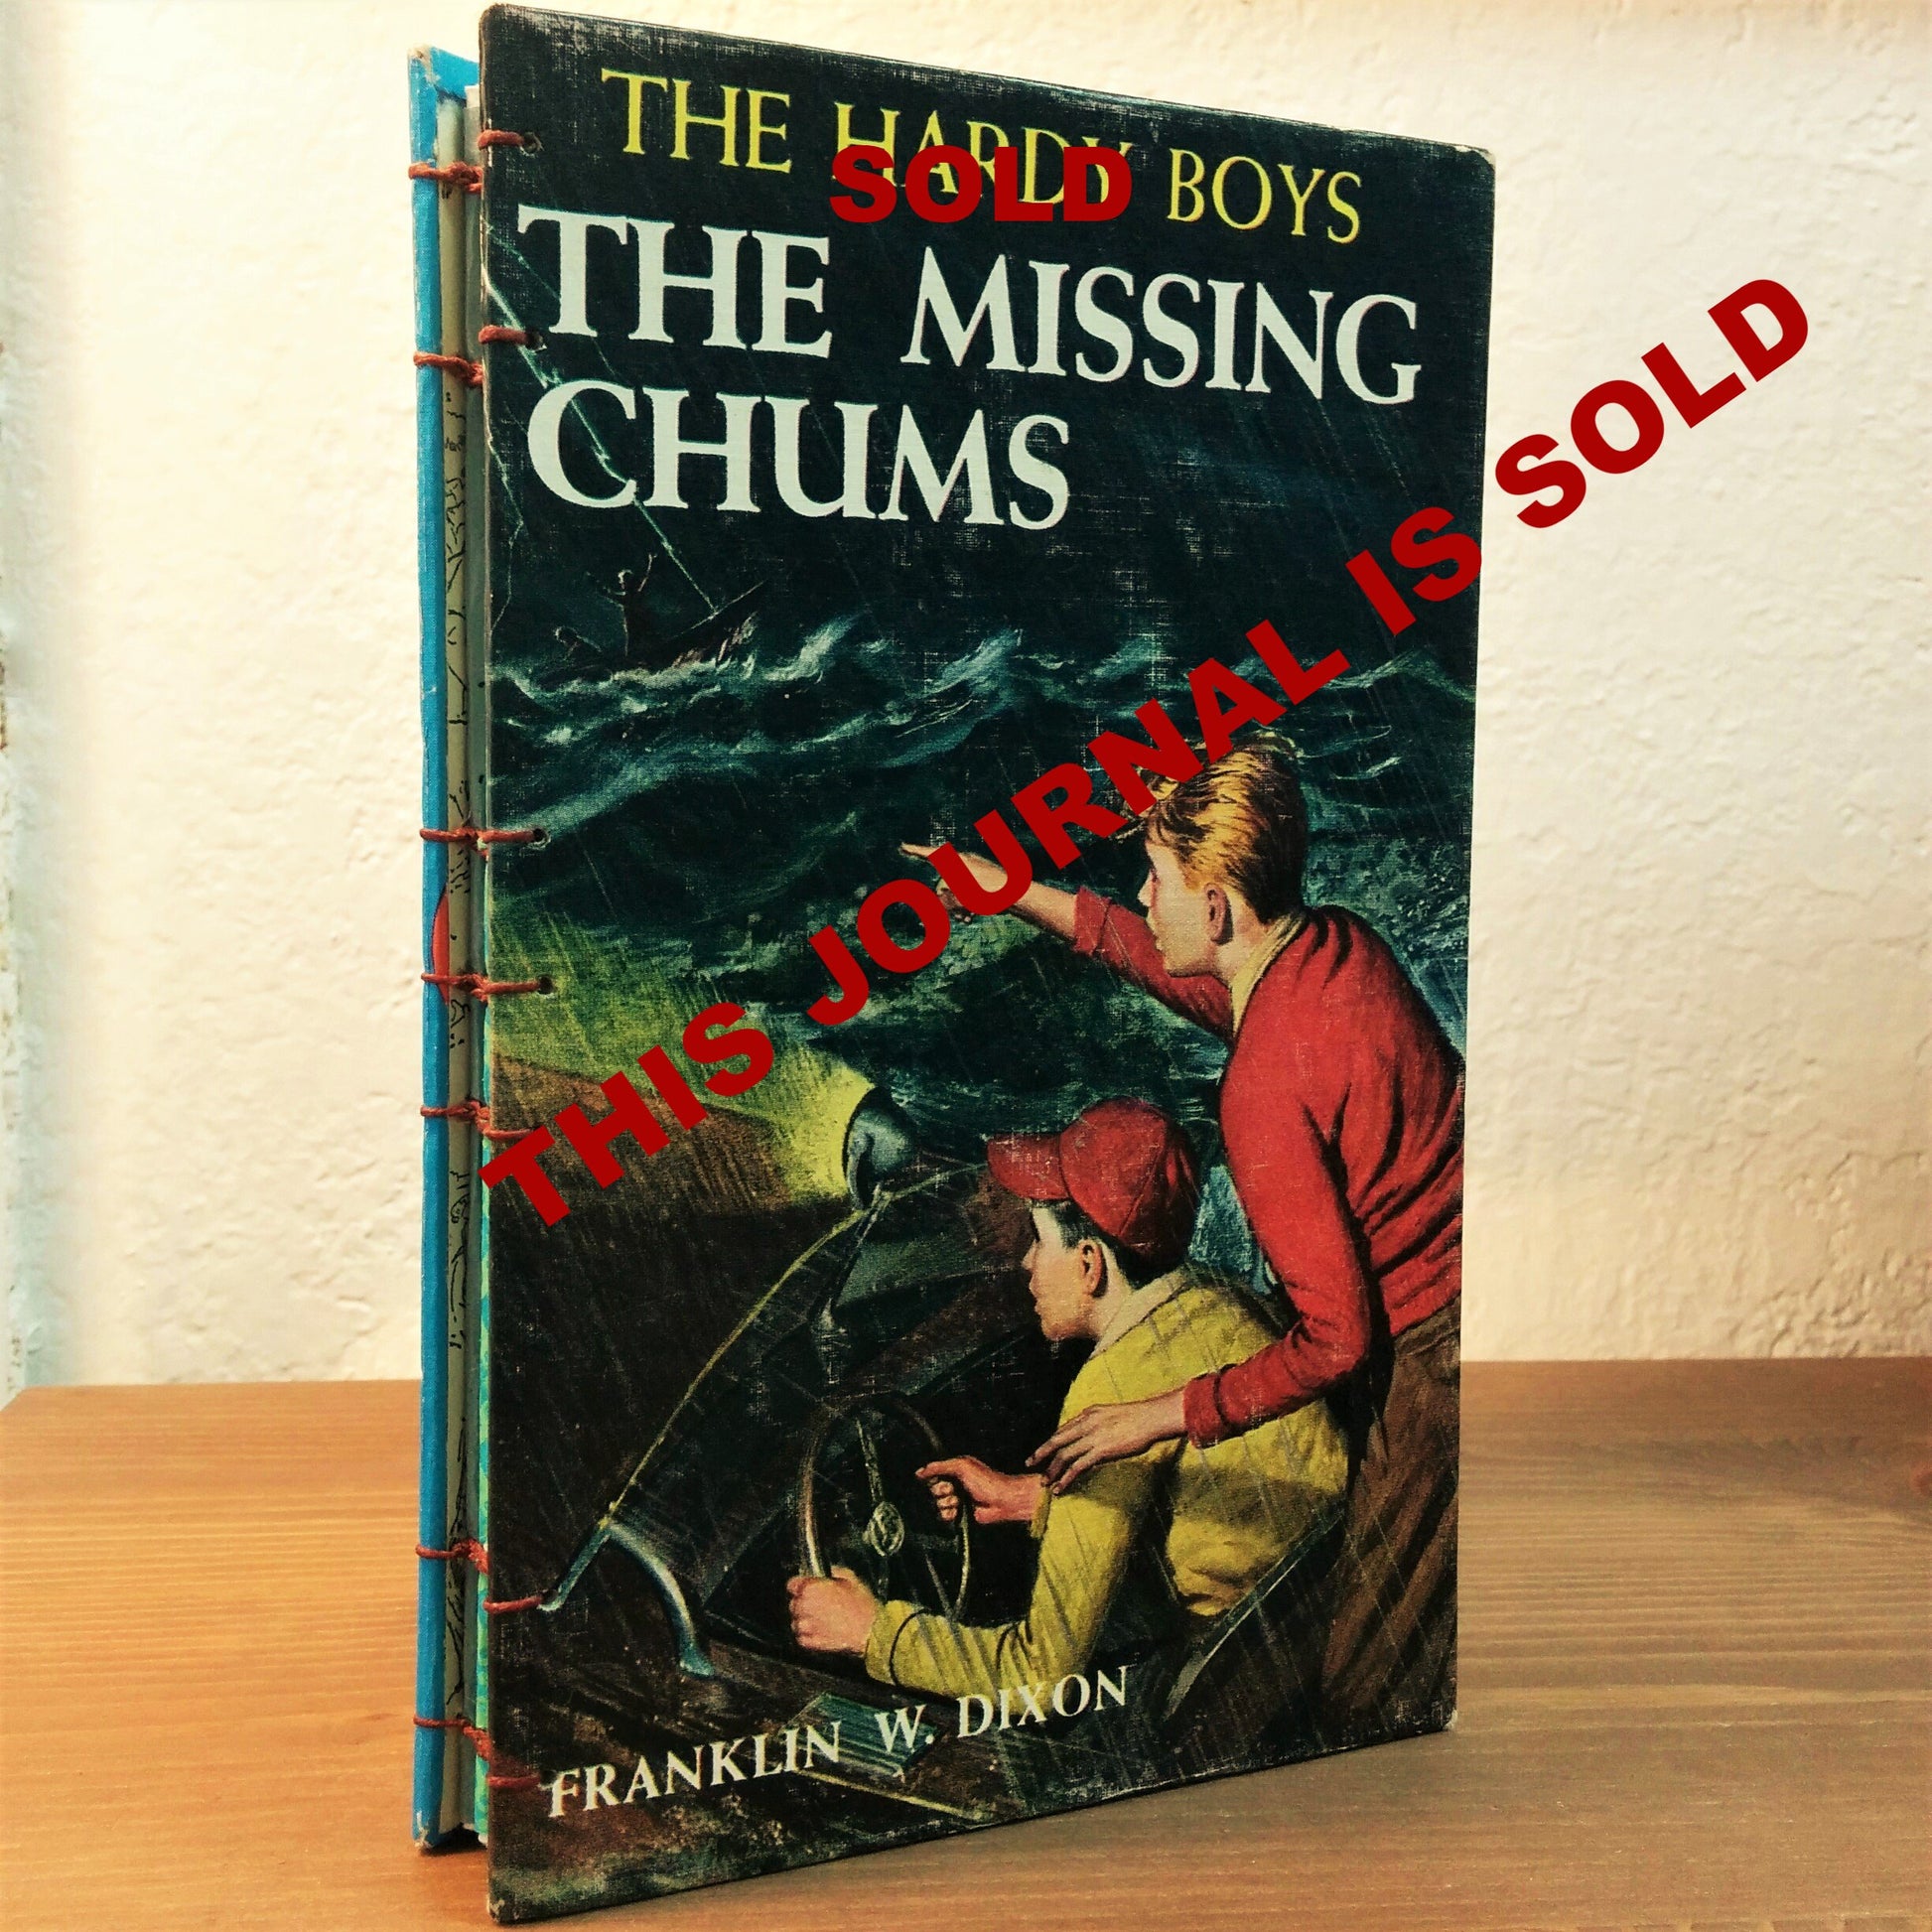 The Hardy Boys reclaimed Journal with cover The Missing Chums